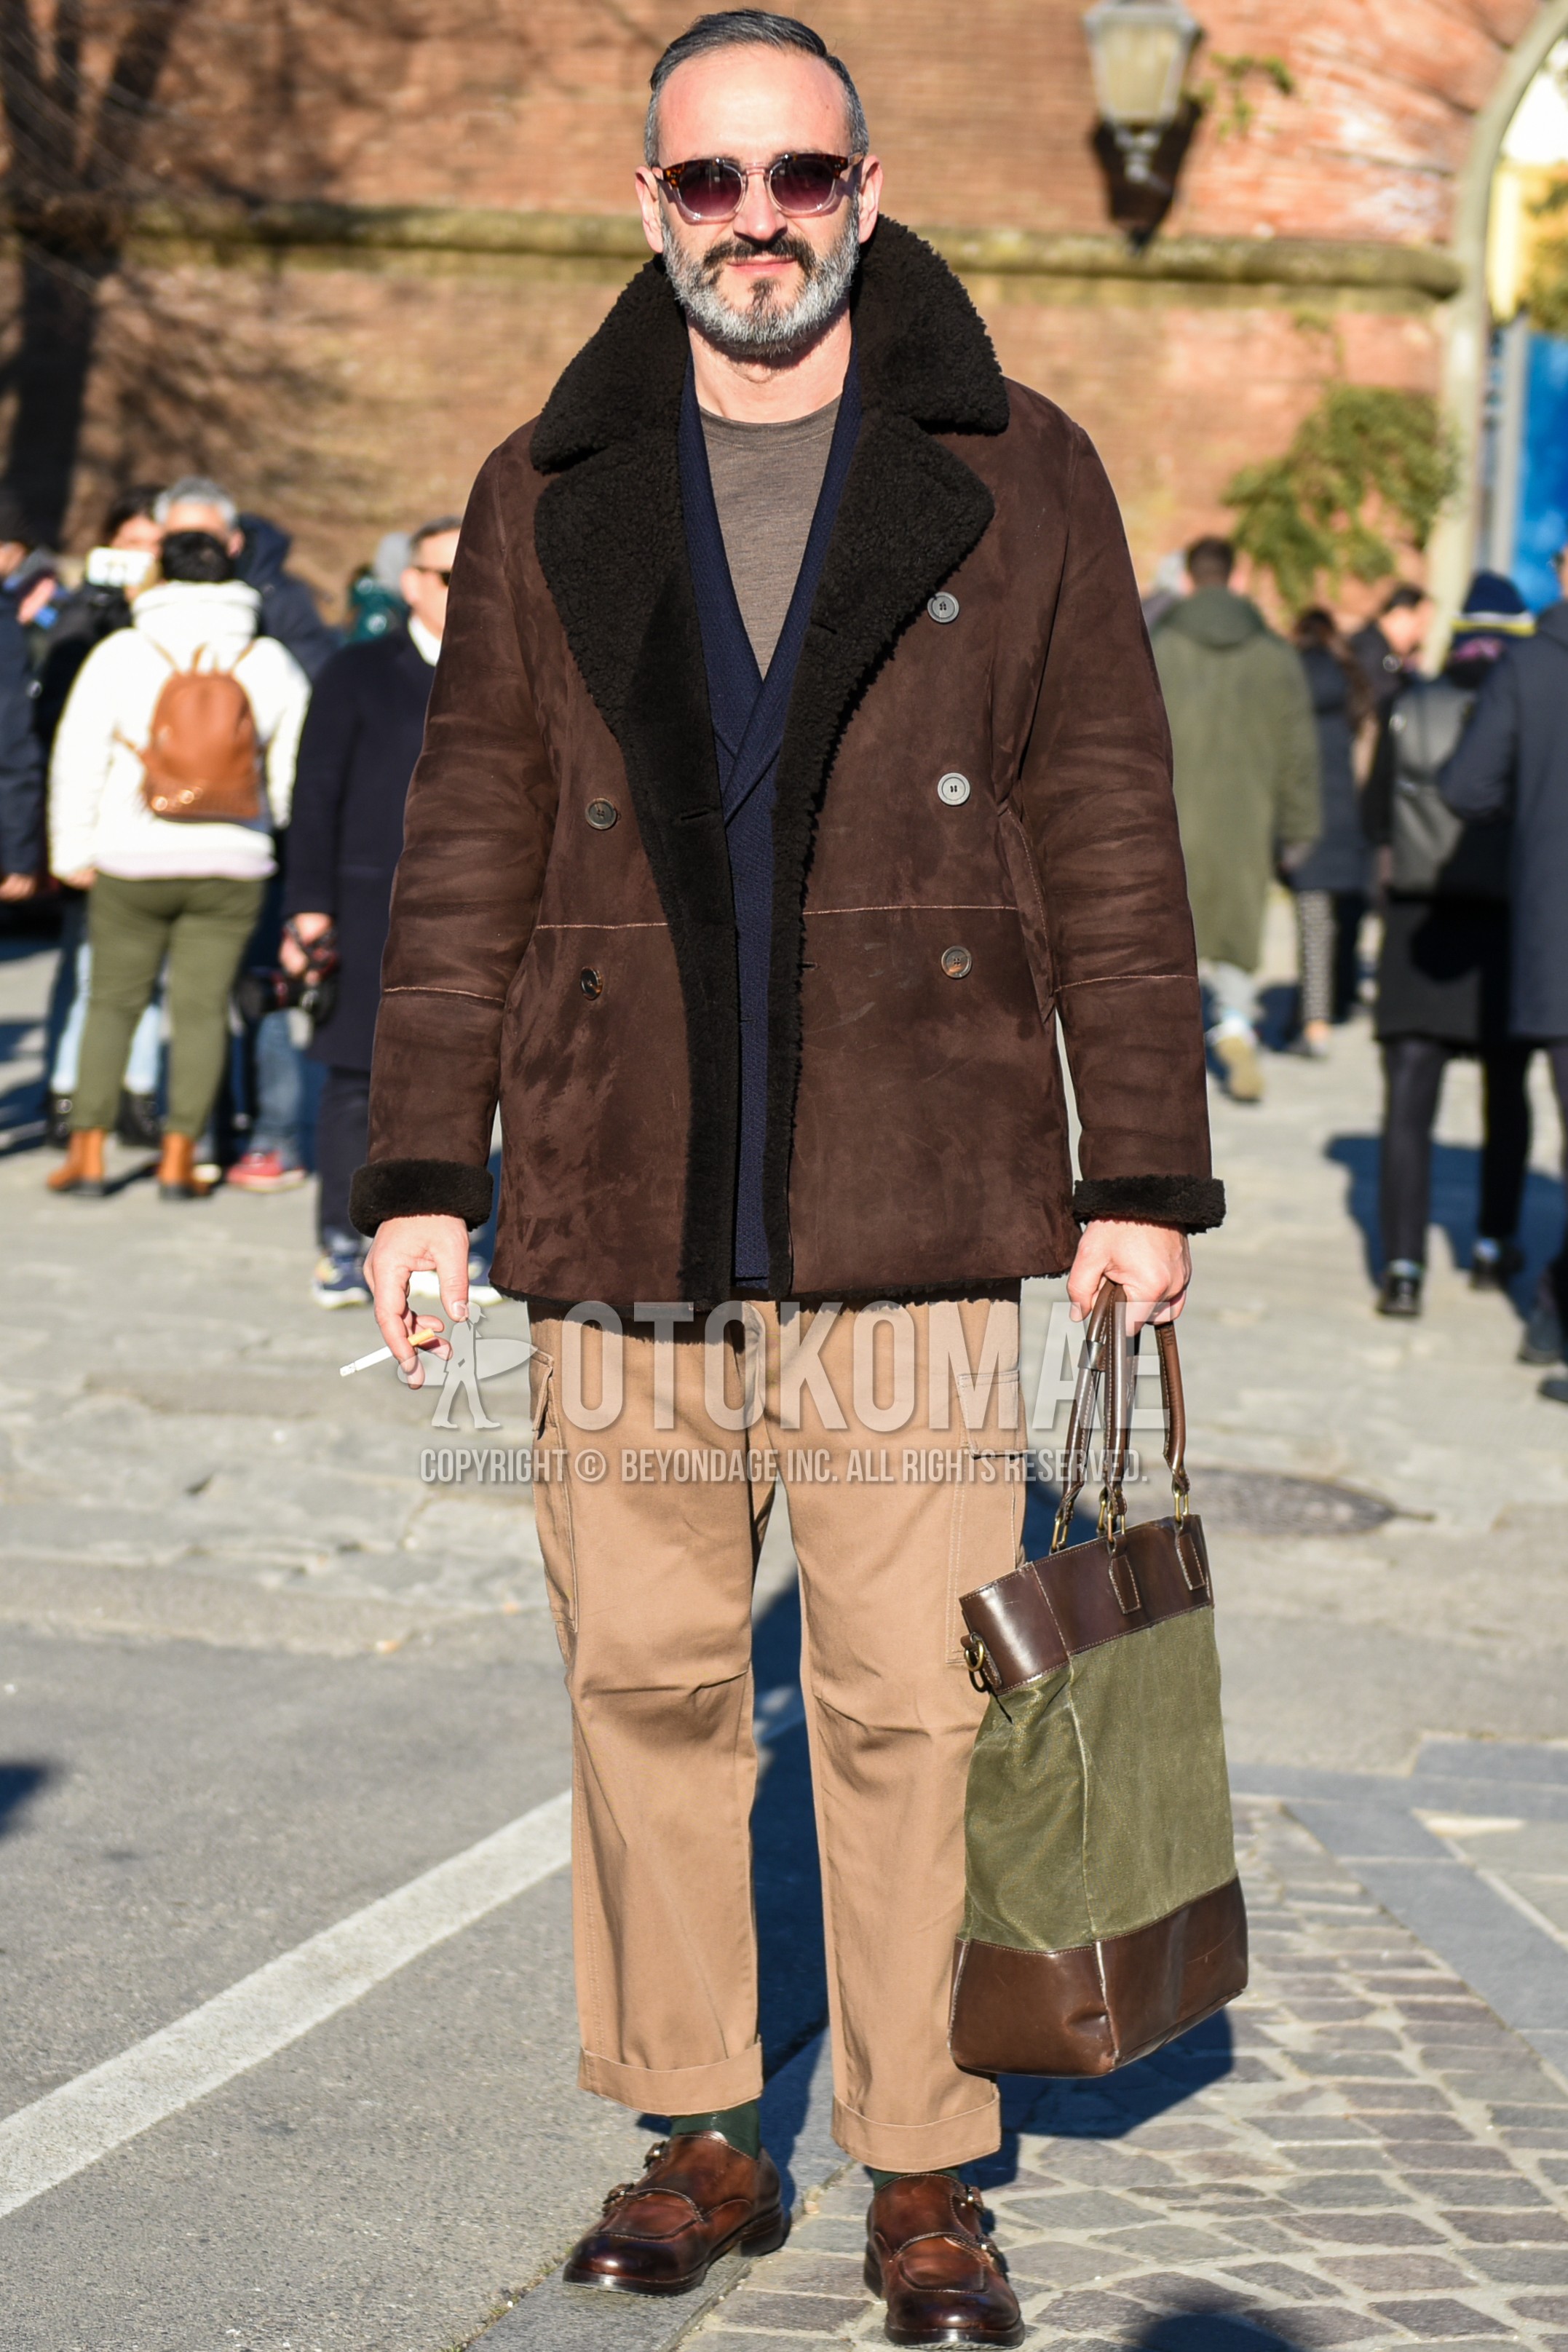 Men's autumn winter outfit with brown tortoiseshell sunglasses, brown plain p coat, brown plain leather jacket, navy plain tailored jacket, gray plain t-shirt, beige plain cargo pants, beige plain chinos, olive green plain socks, brown monk shoes leather shoes.